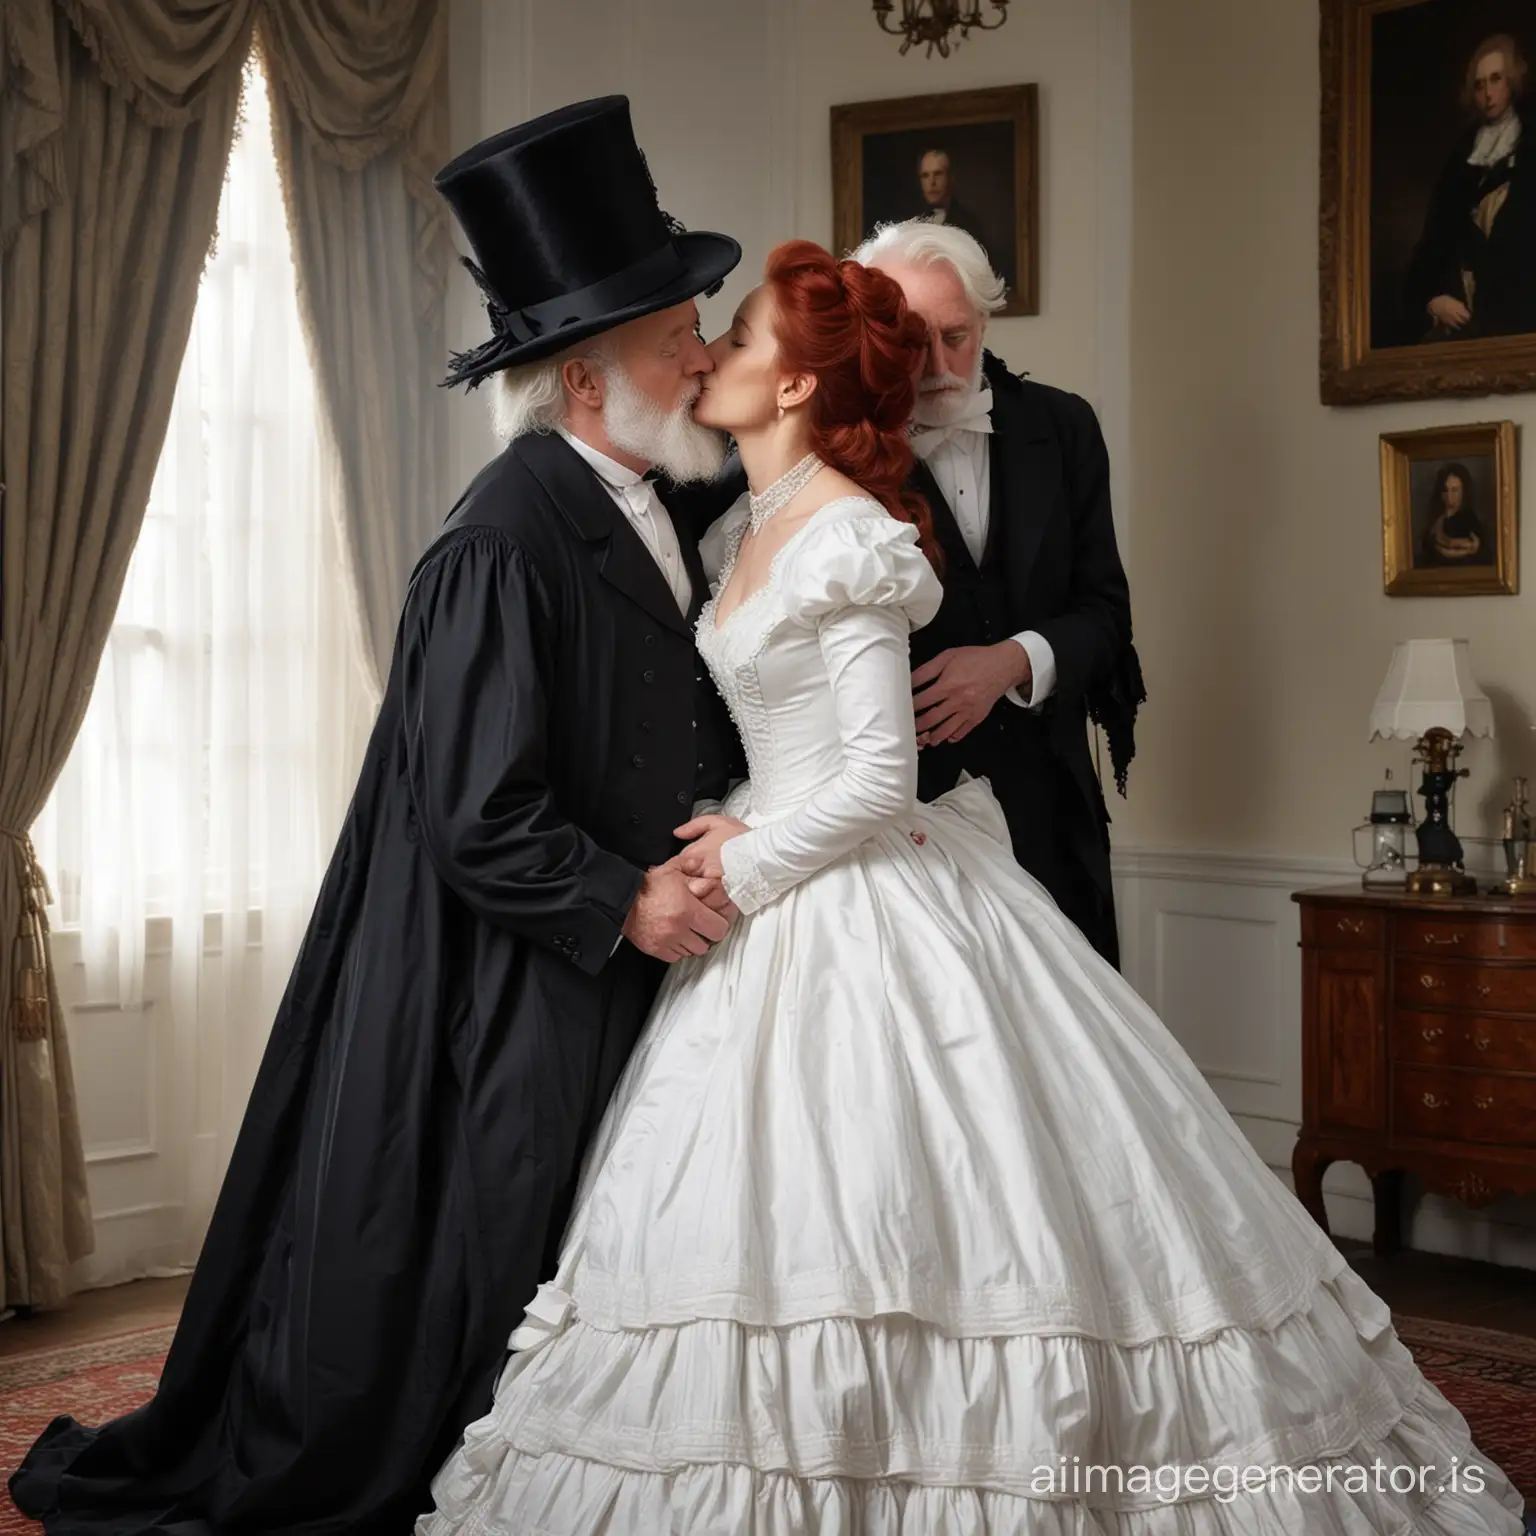 Victorian-Newlyweds-RedHaired-Gillian-Anderson-Kisses-Her-Husband-in-Poofy-Black-Crinoline-Dress